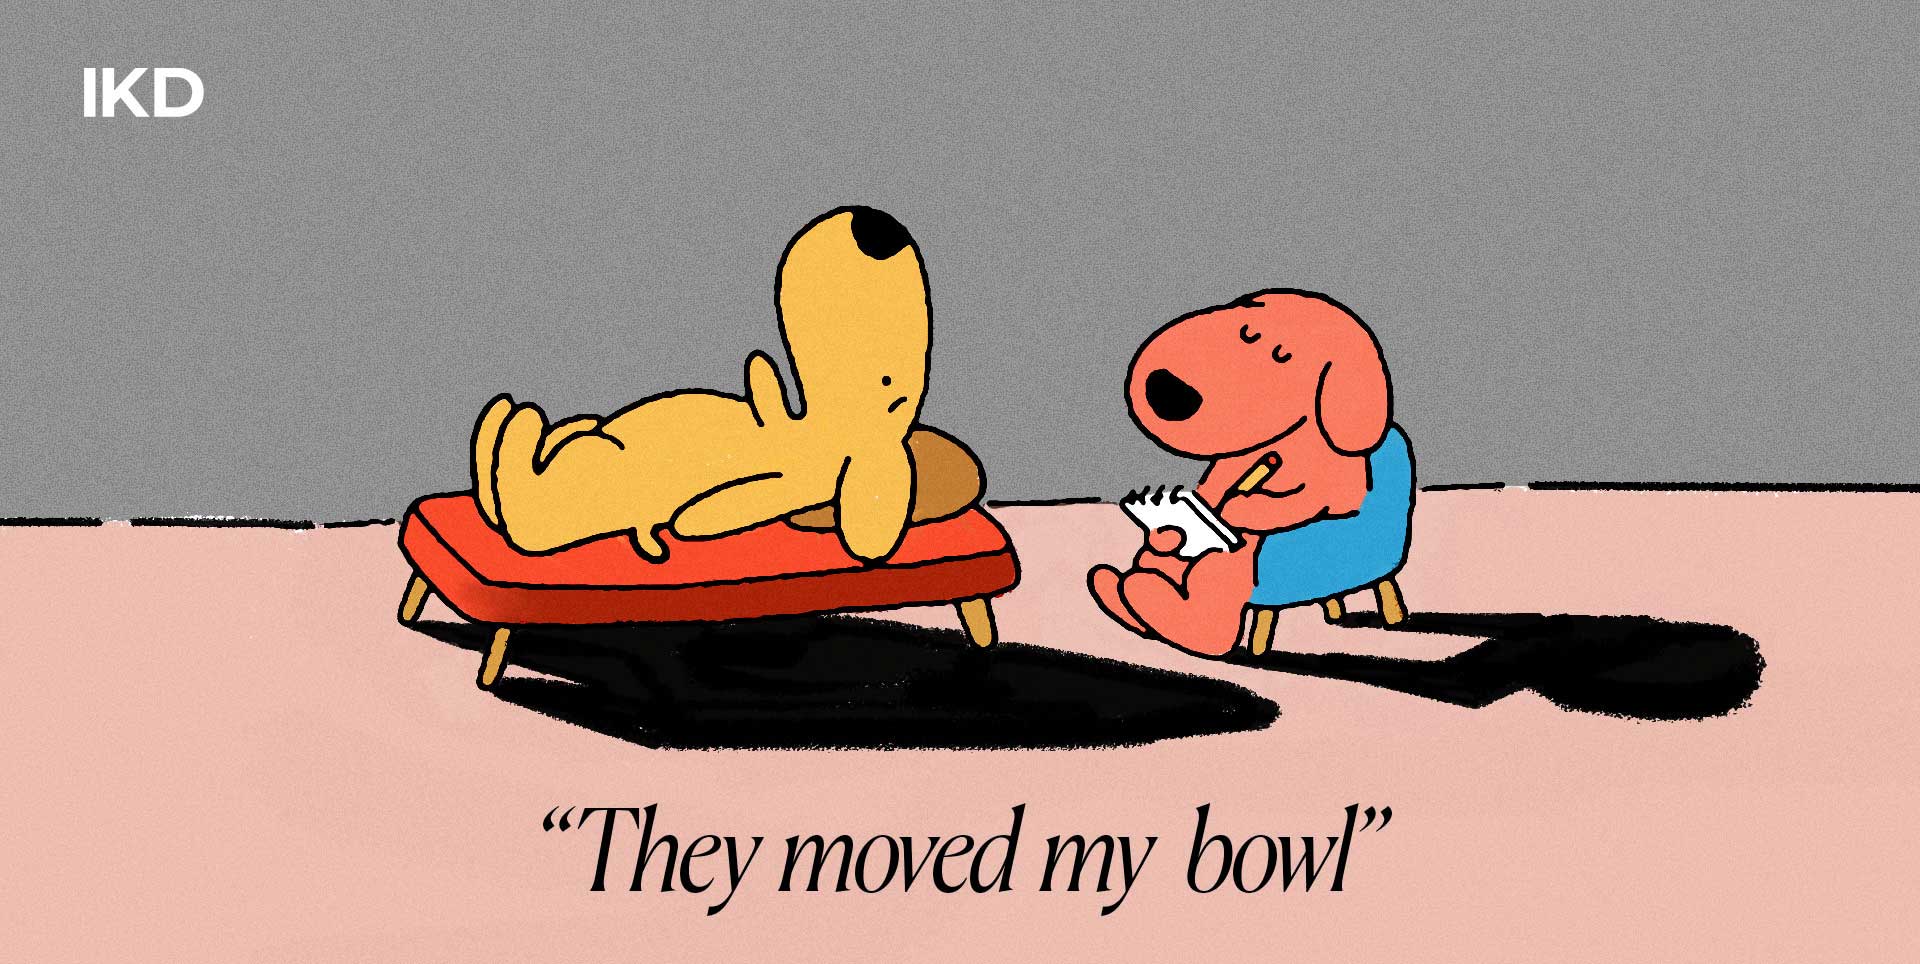 Comic of a dog complaining about his bowl being moved